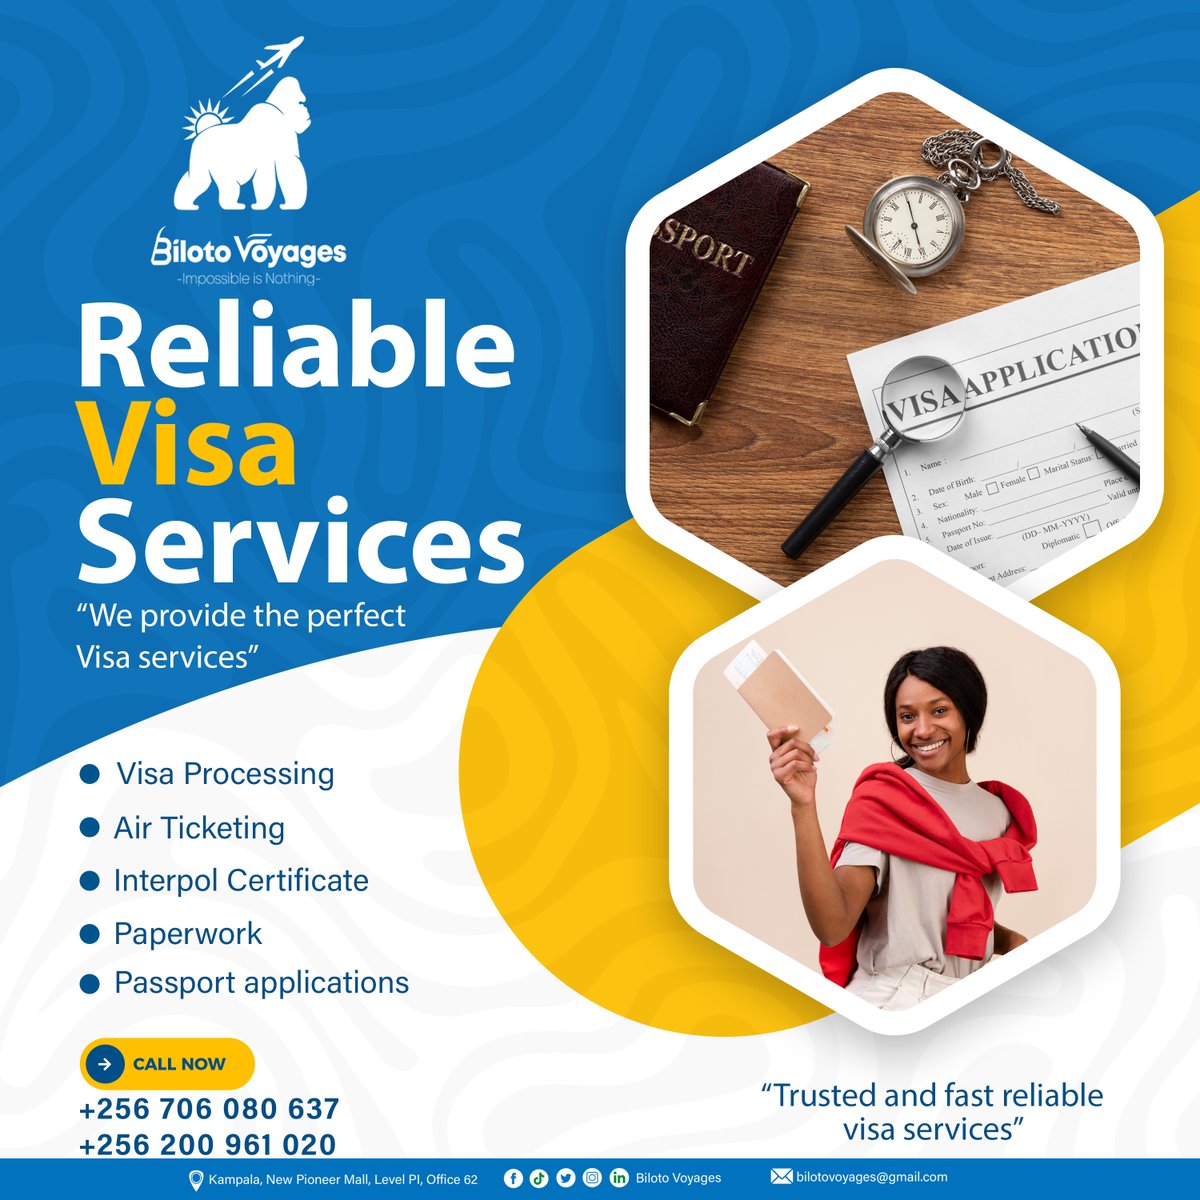 Looking for reliable Visa services to help in your travel plans, look no further than Biloto Voyages Ltd for all travel services like #airtickets, #hotels, #holidays #documentation, #visa

For more information:
Call/ WhatsApp; +256706080637 /+256200961020

#bilotovoyage